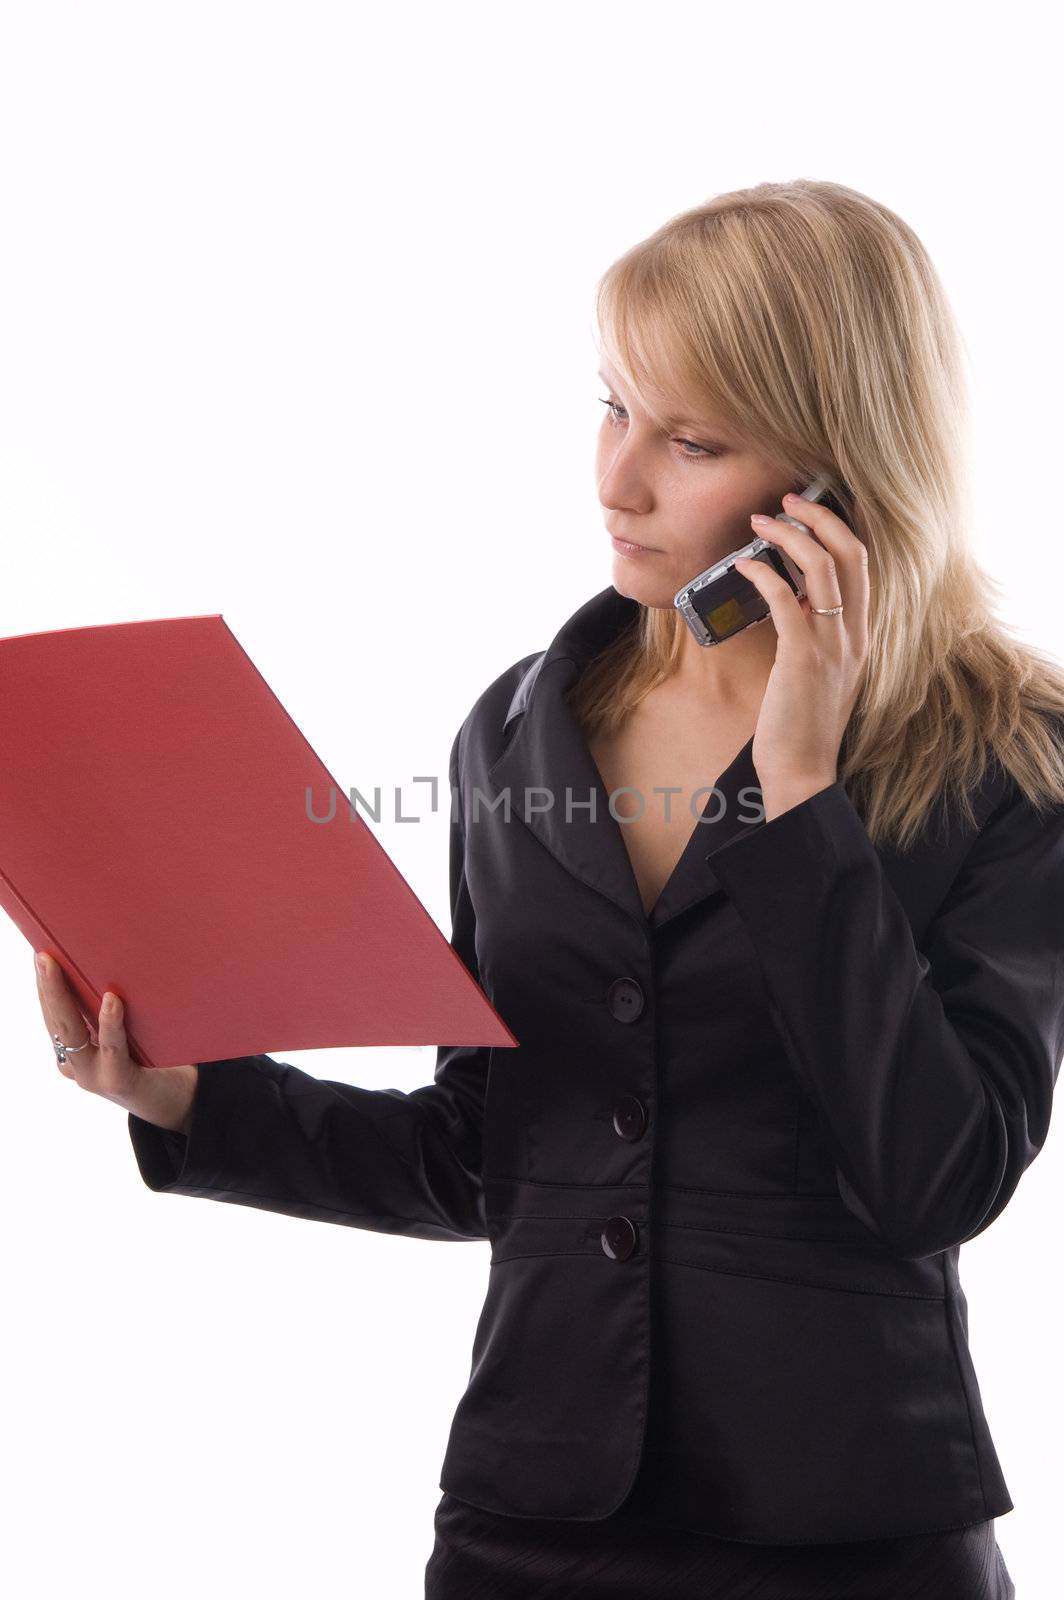 The businesswoman reads documents and speaks by phone.